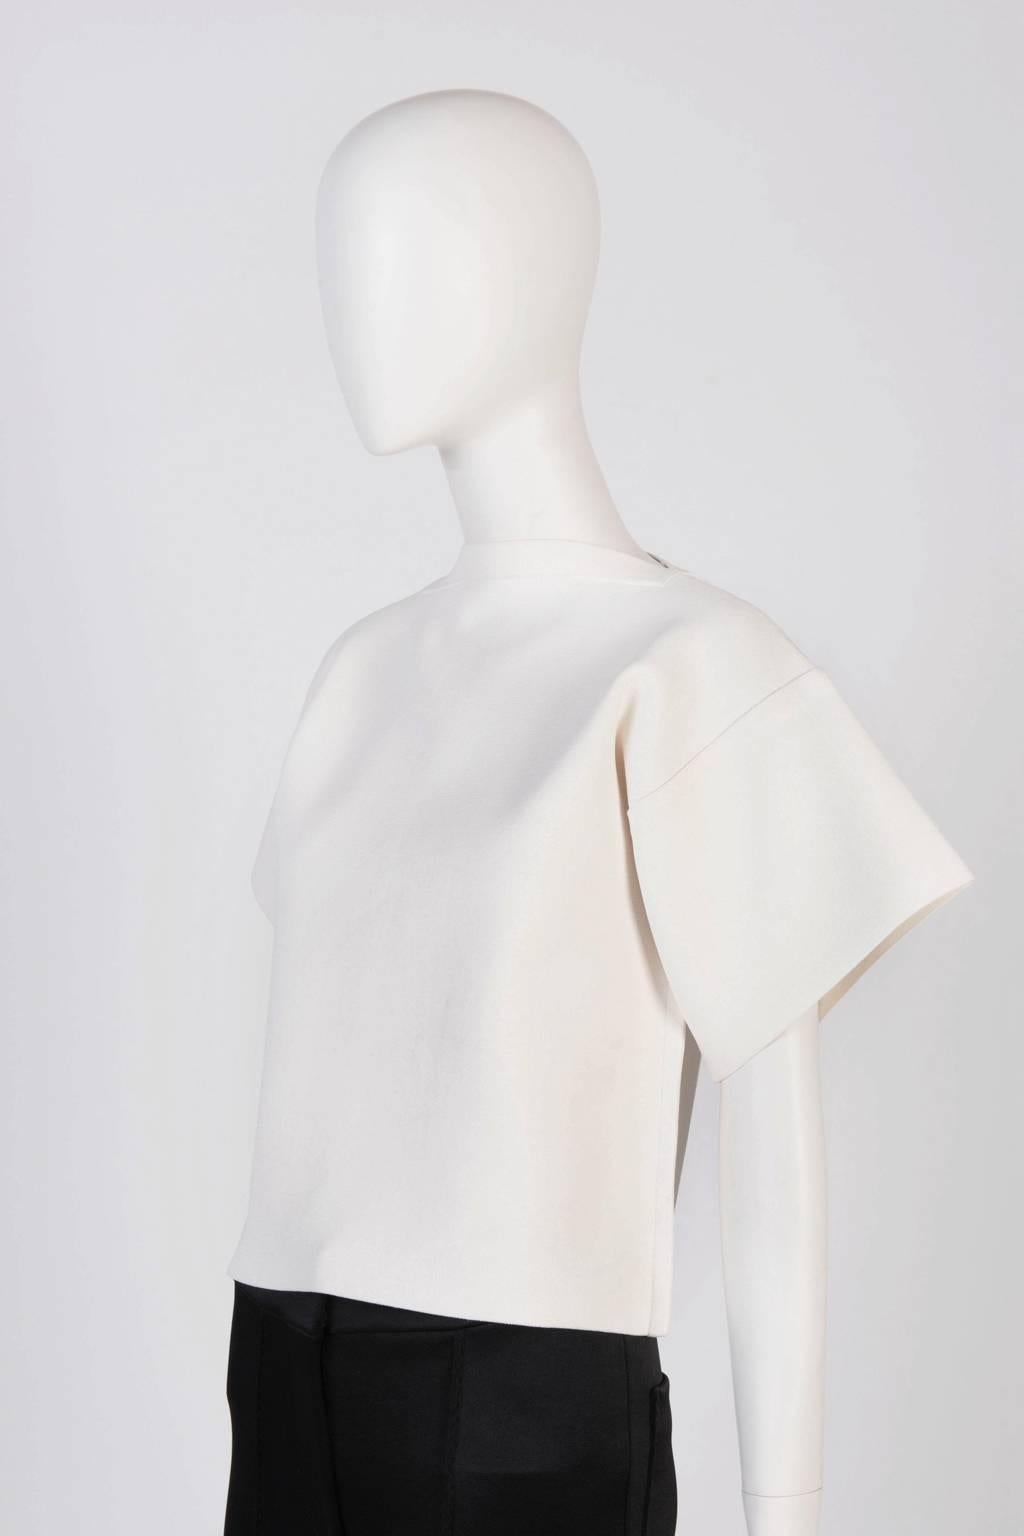 From Maison Martin Magiela main line，this firm milano stitch cream colored top features a modern samurai touch.